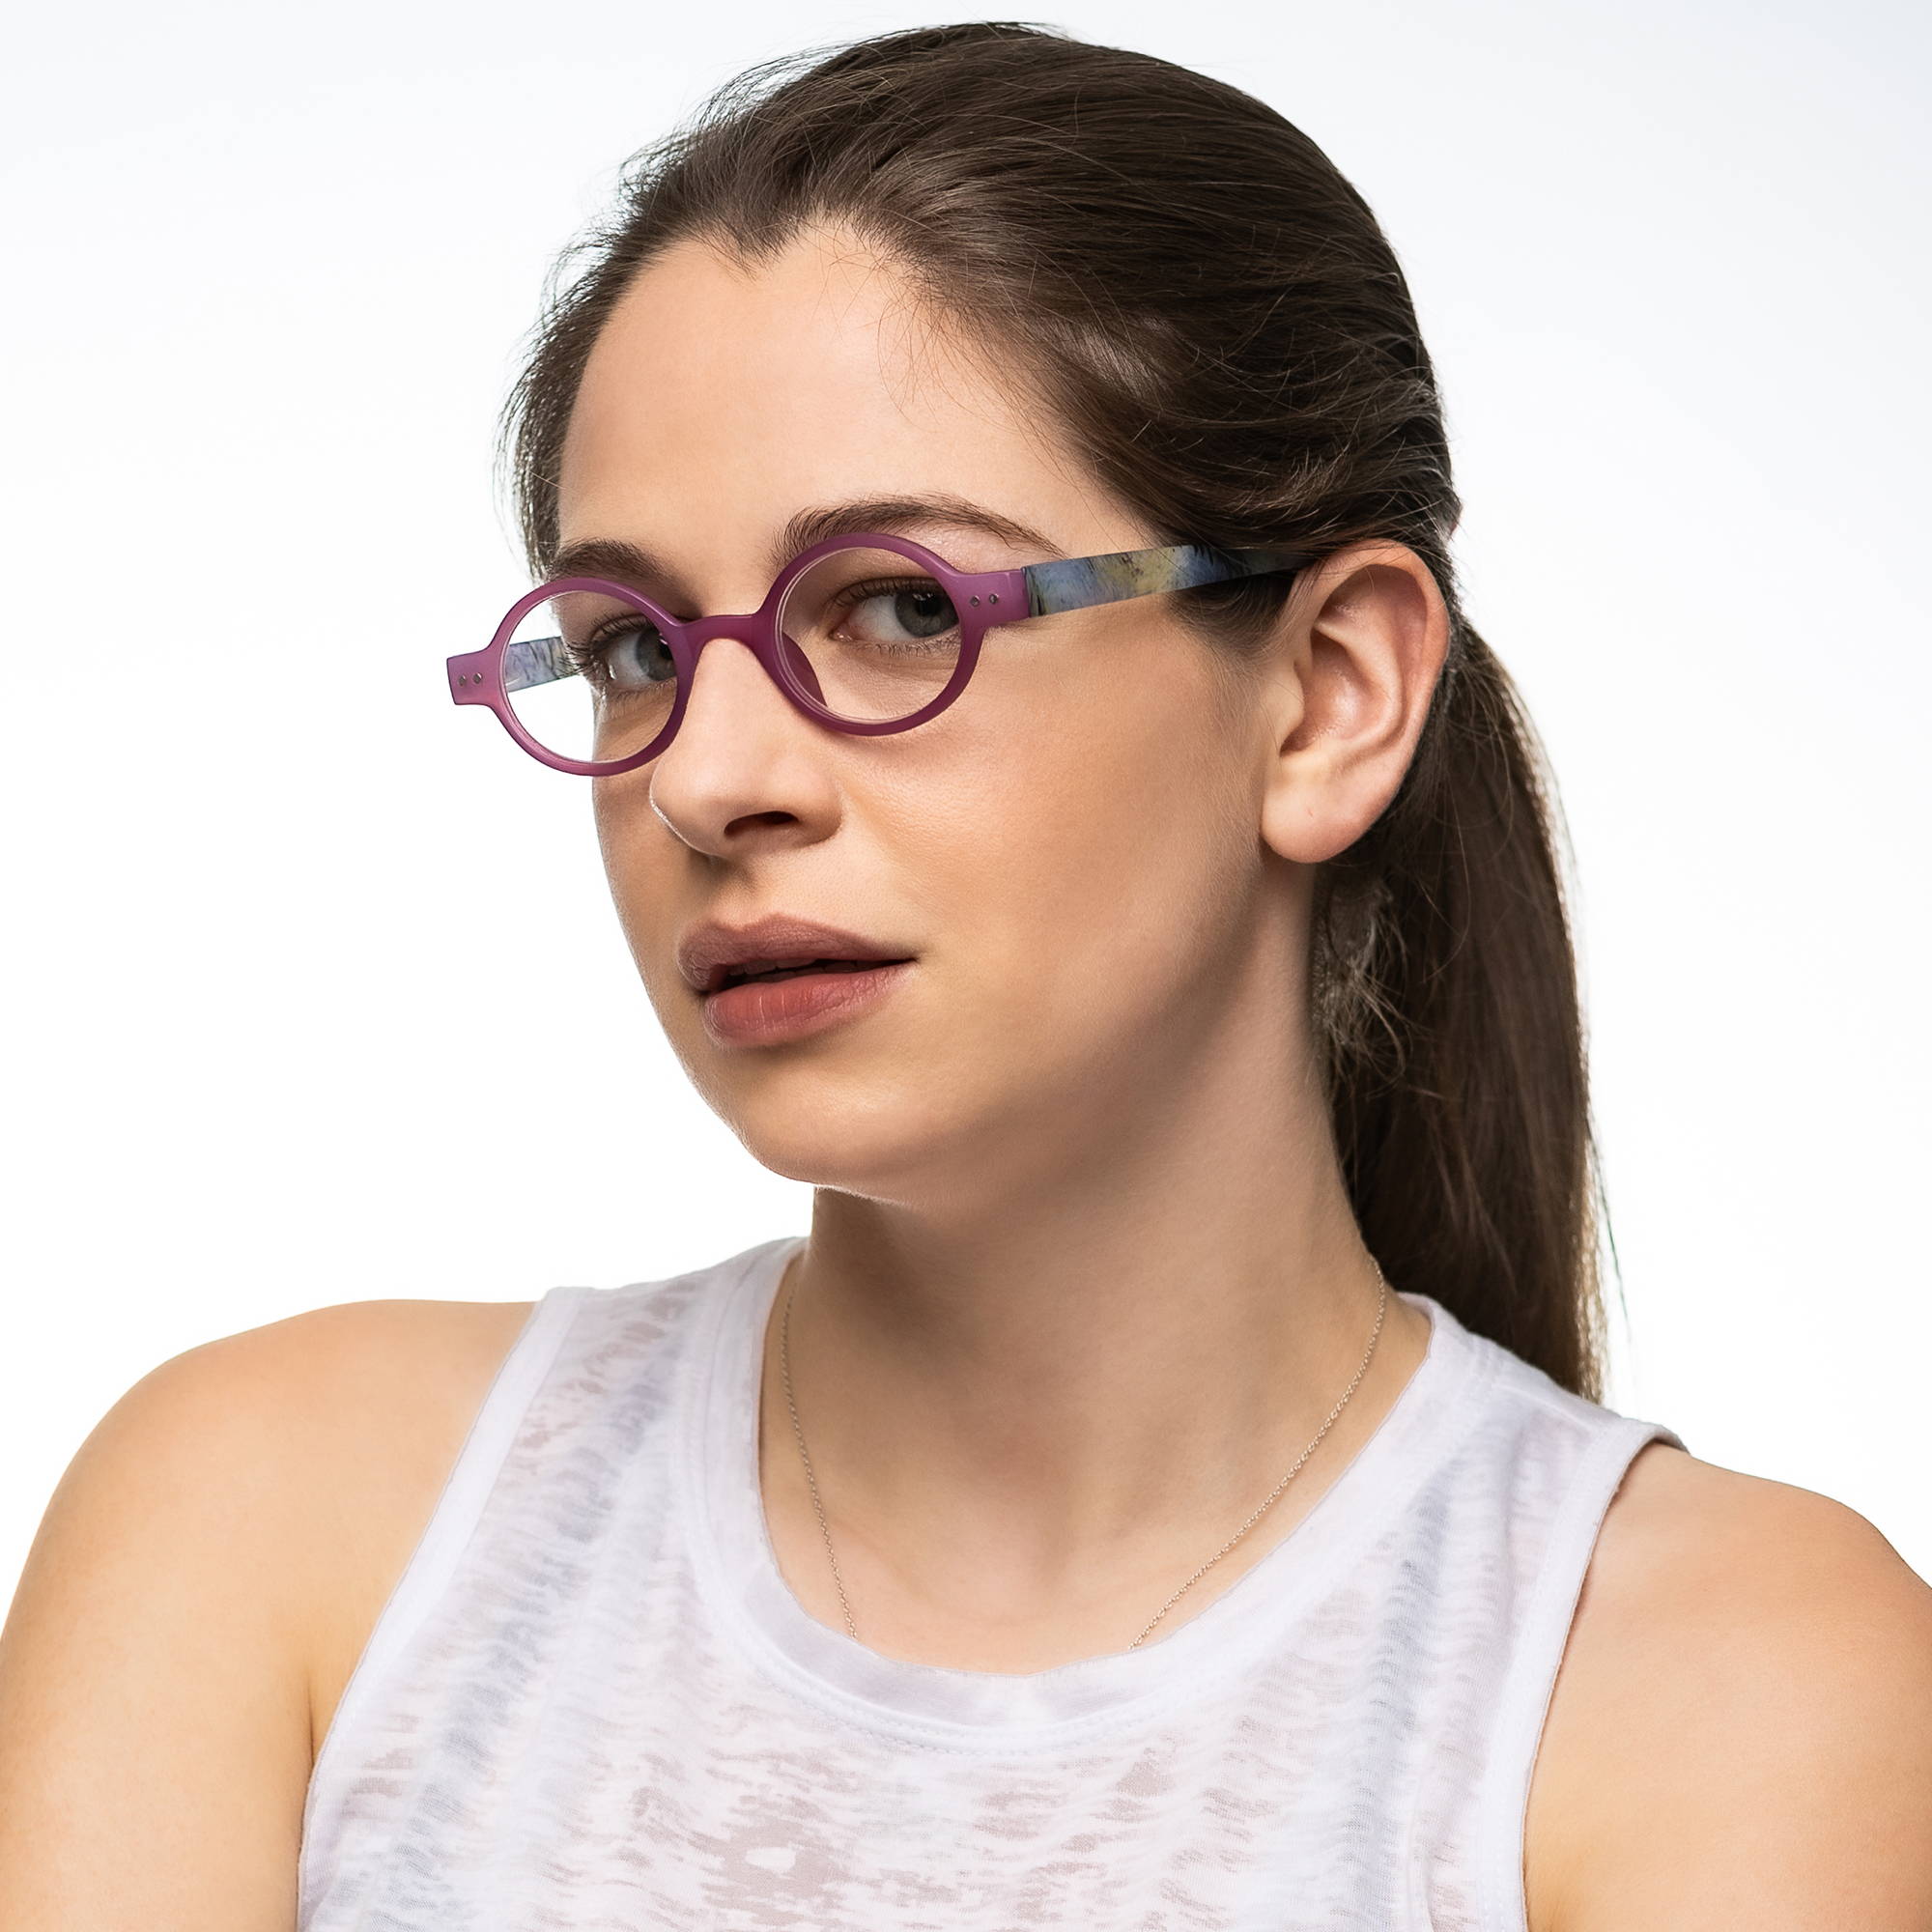 Small Cool Circle Rimmed Glasses for Women R-415